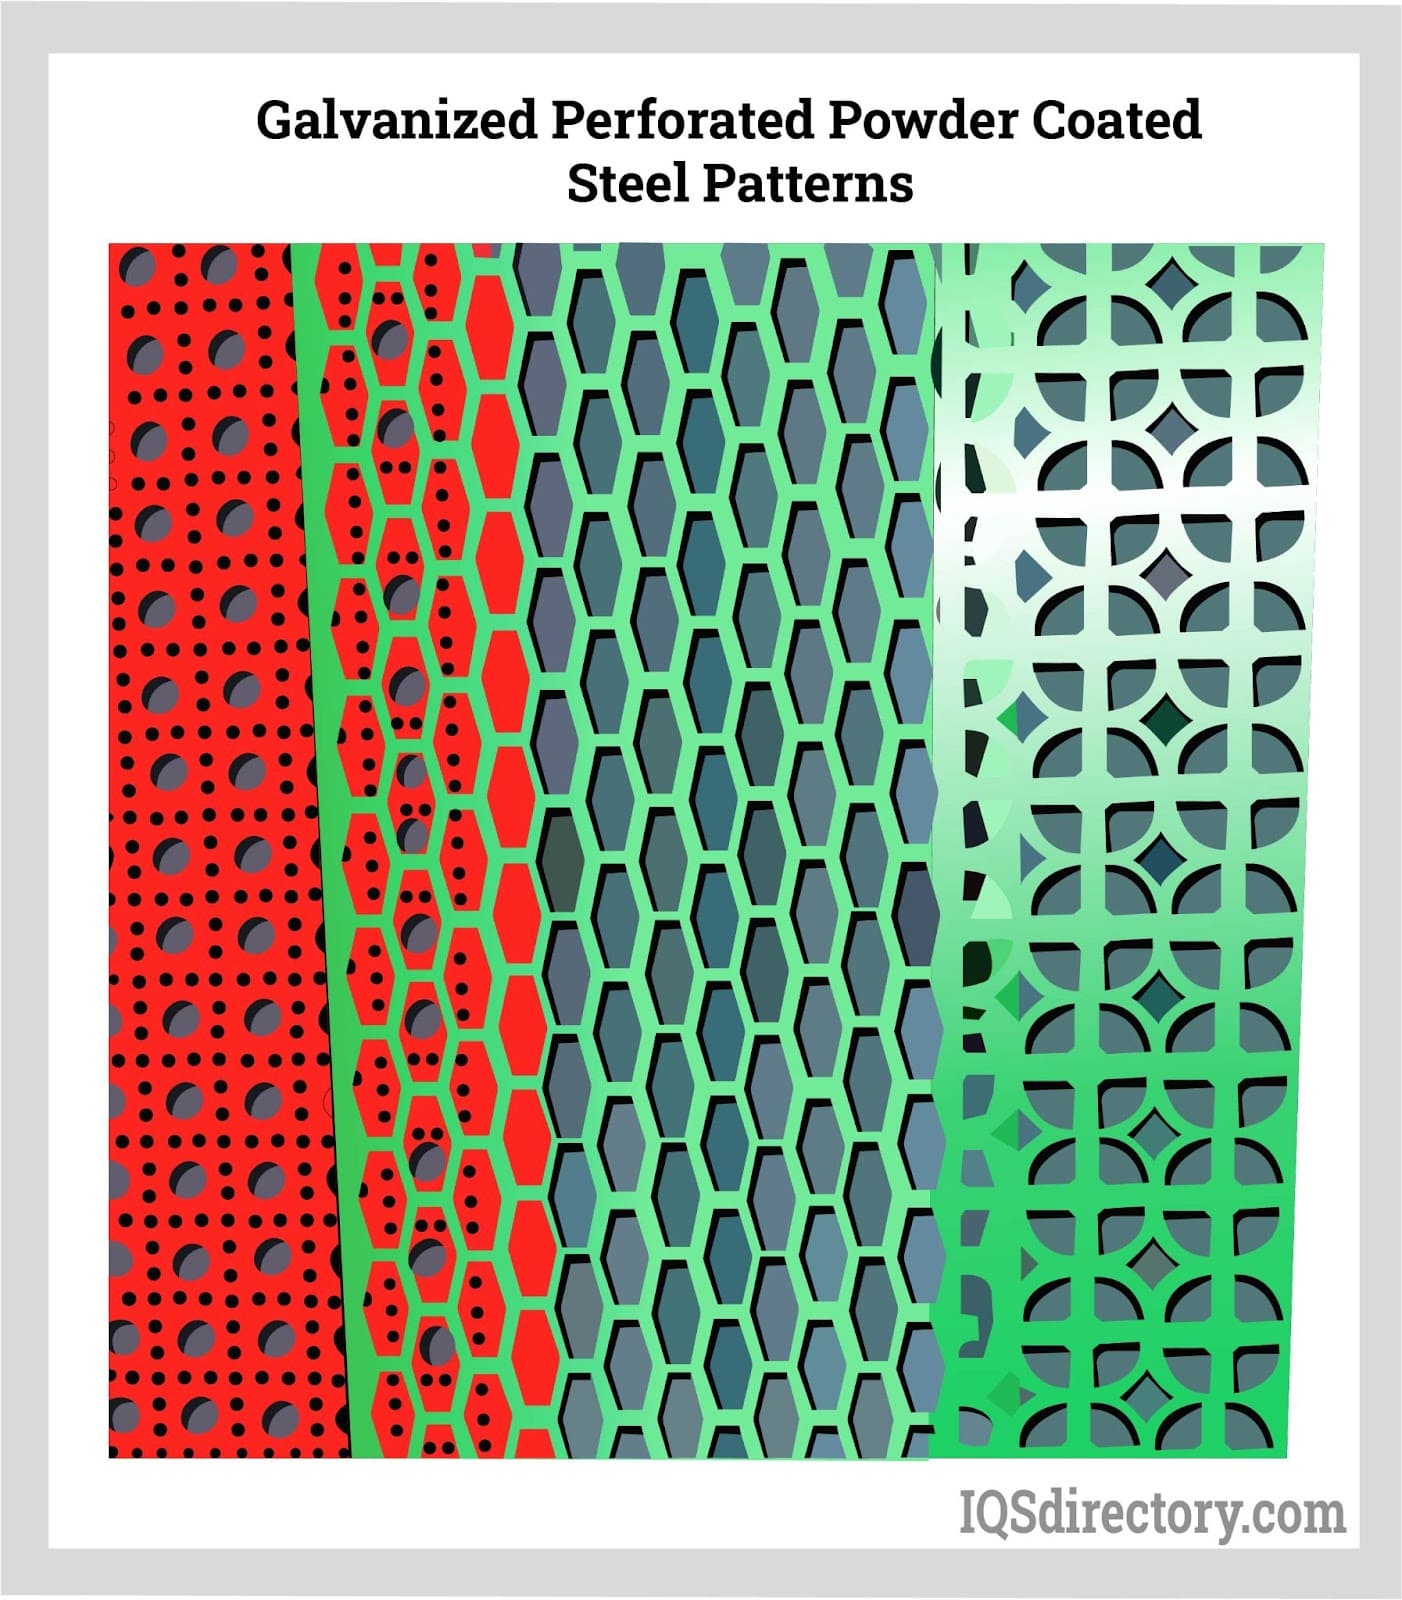 Galvanized Perforated Powder Coated Steel Patterns